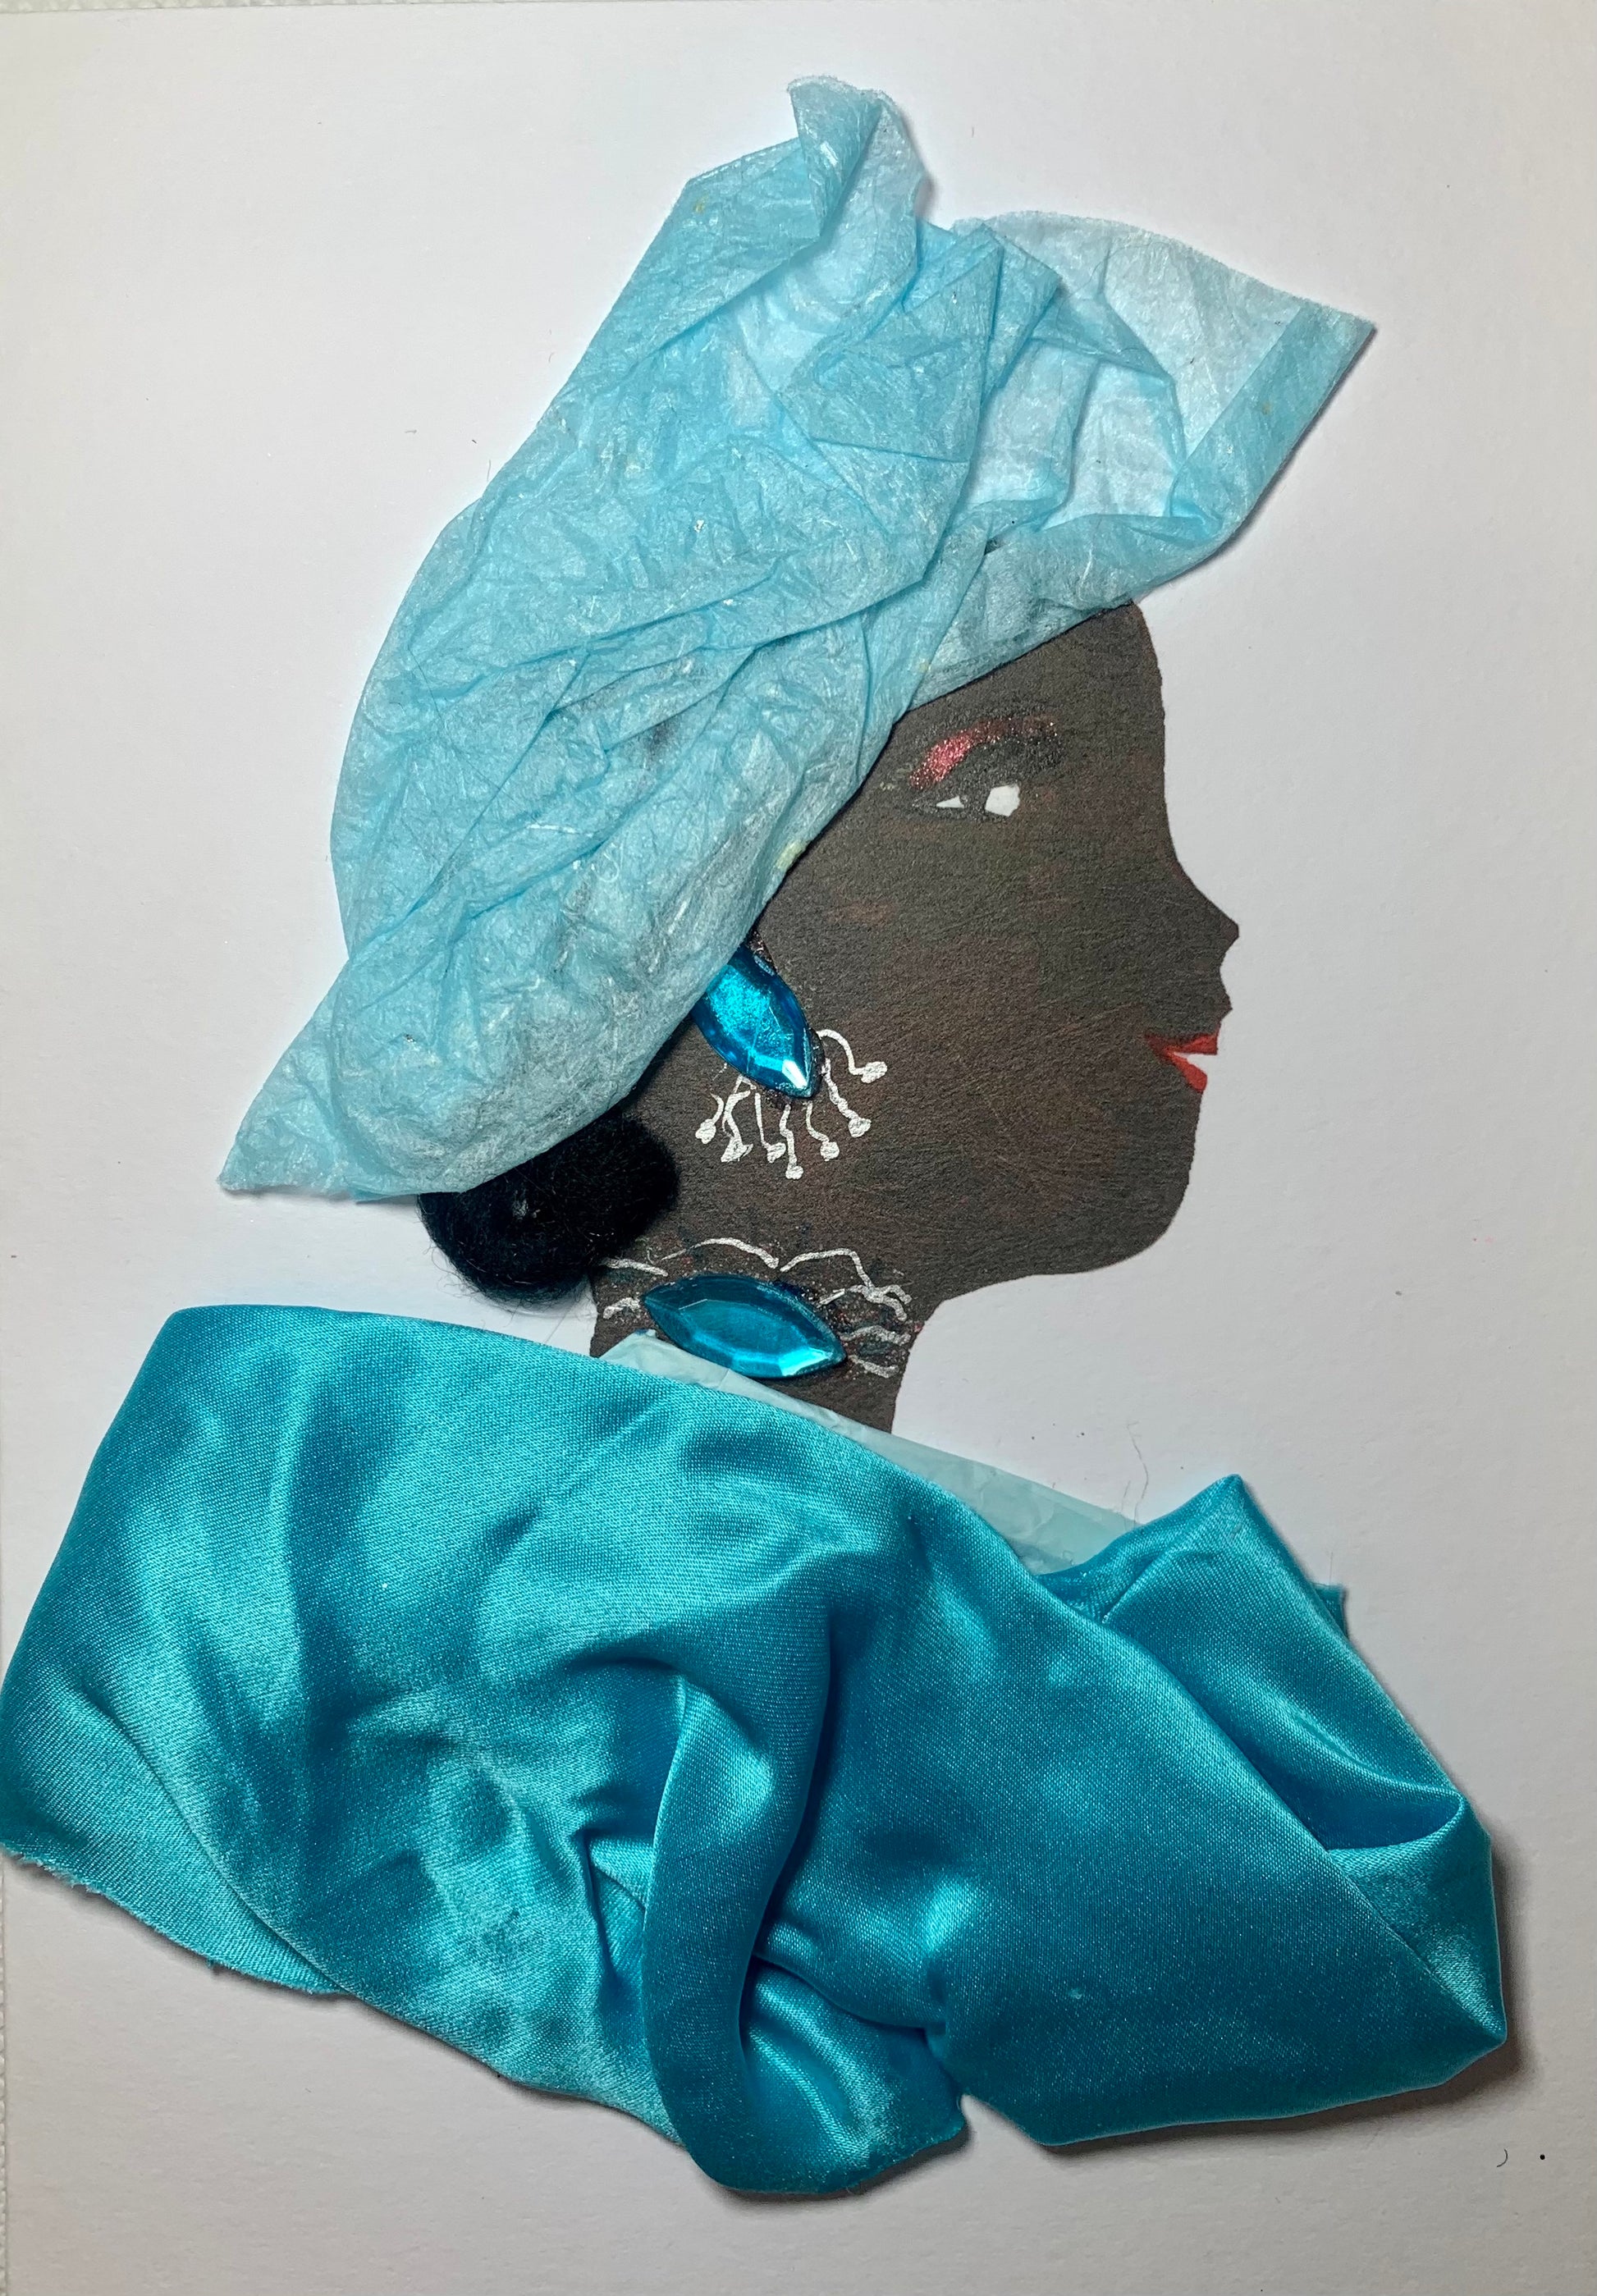 This card has been given the name Dami. Dami wears a billowing sky blue silk blouse. Her jewellery is pointed shape oval gems that are a matching blue to the dress. Her headscarf is a slightly lighter blue recycled paper material. 